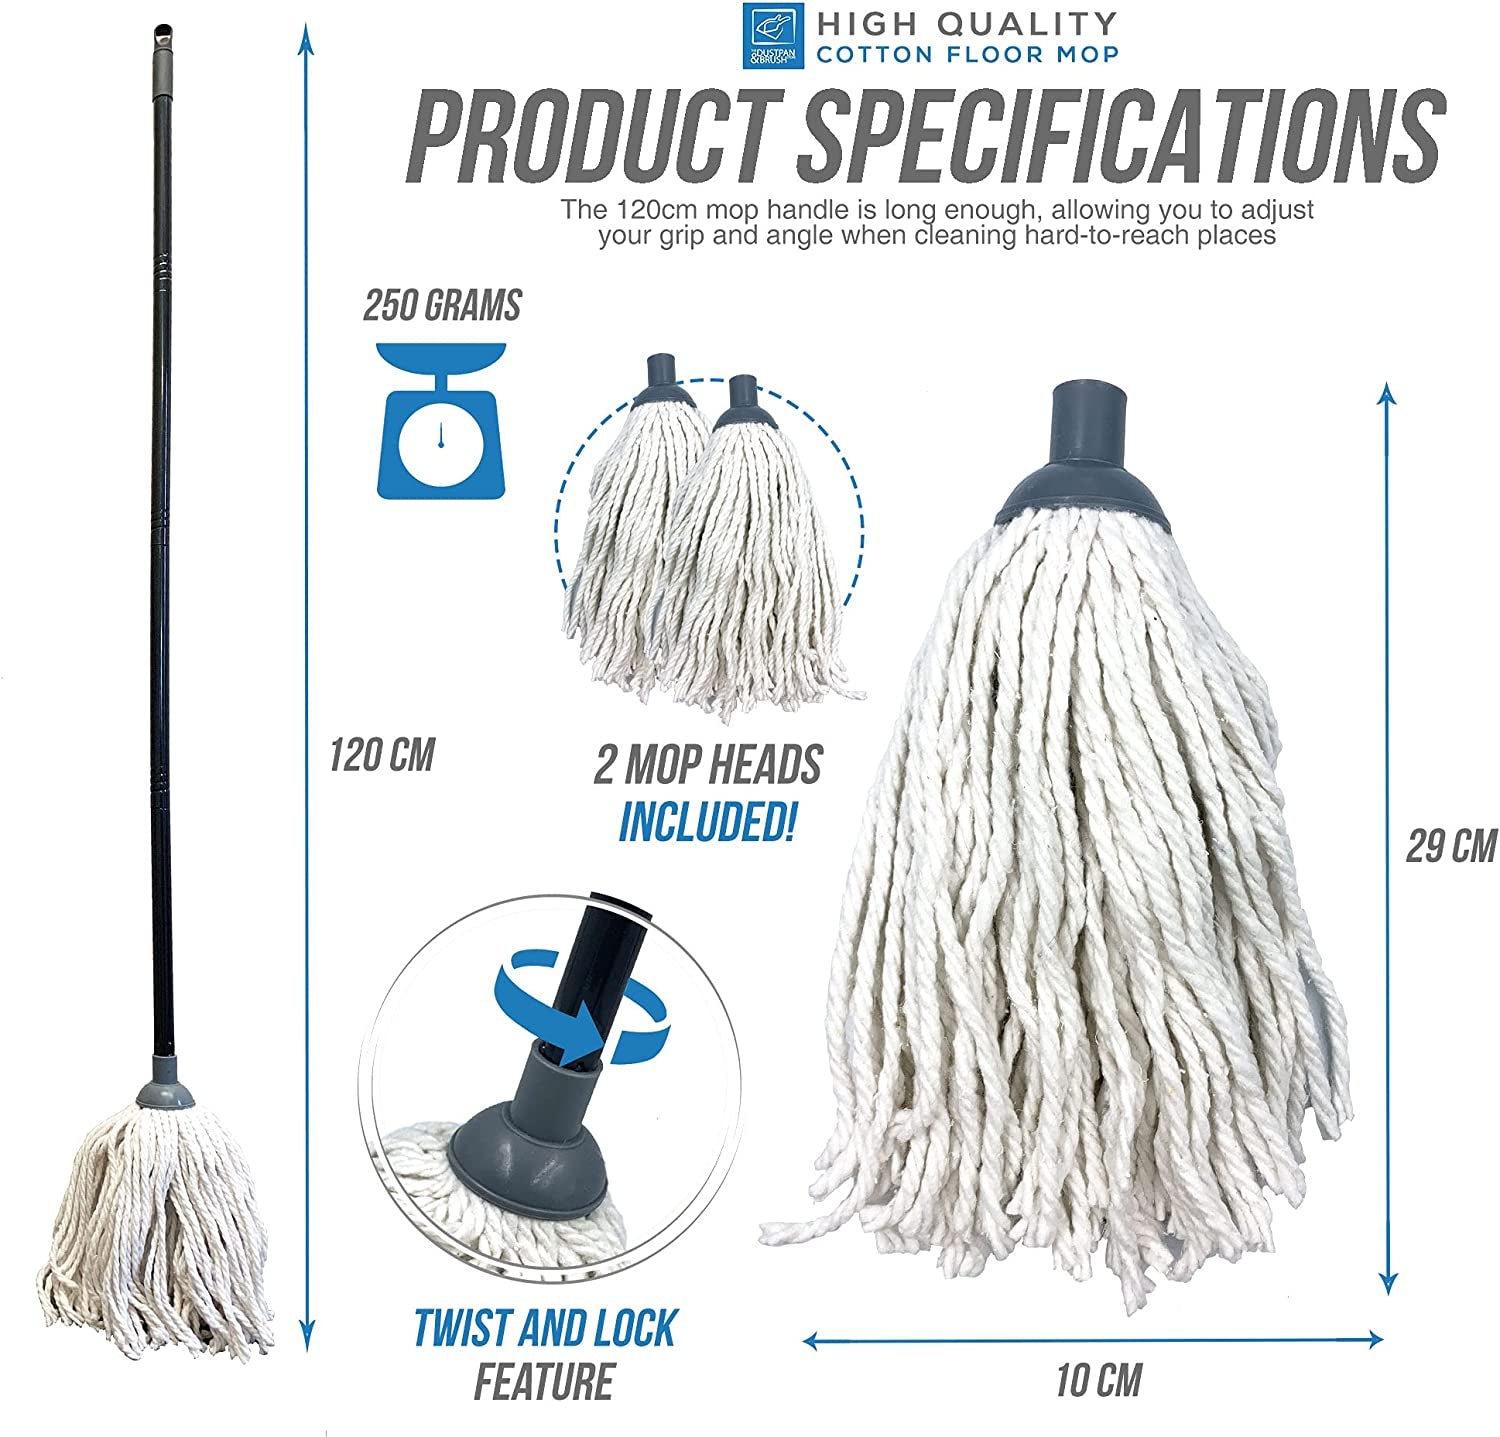 Cotton Floor Mops High Quality Mop System with Super Absorbent Cotton Mop Head, 110Cm Metal Mop Handle and Extra Mop Head Refill Effective Cleaning Mop for Home, Office and Commercial Use